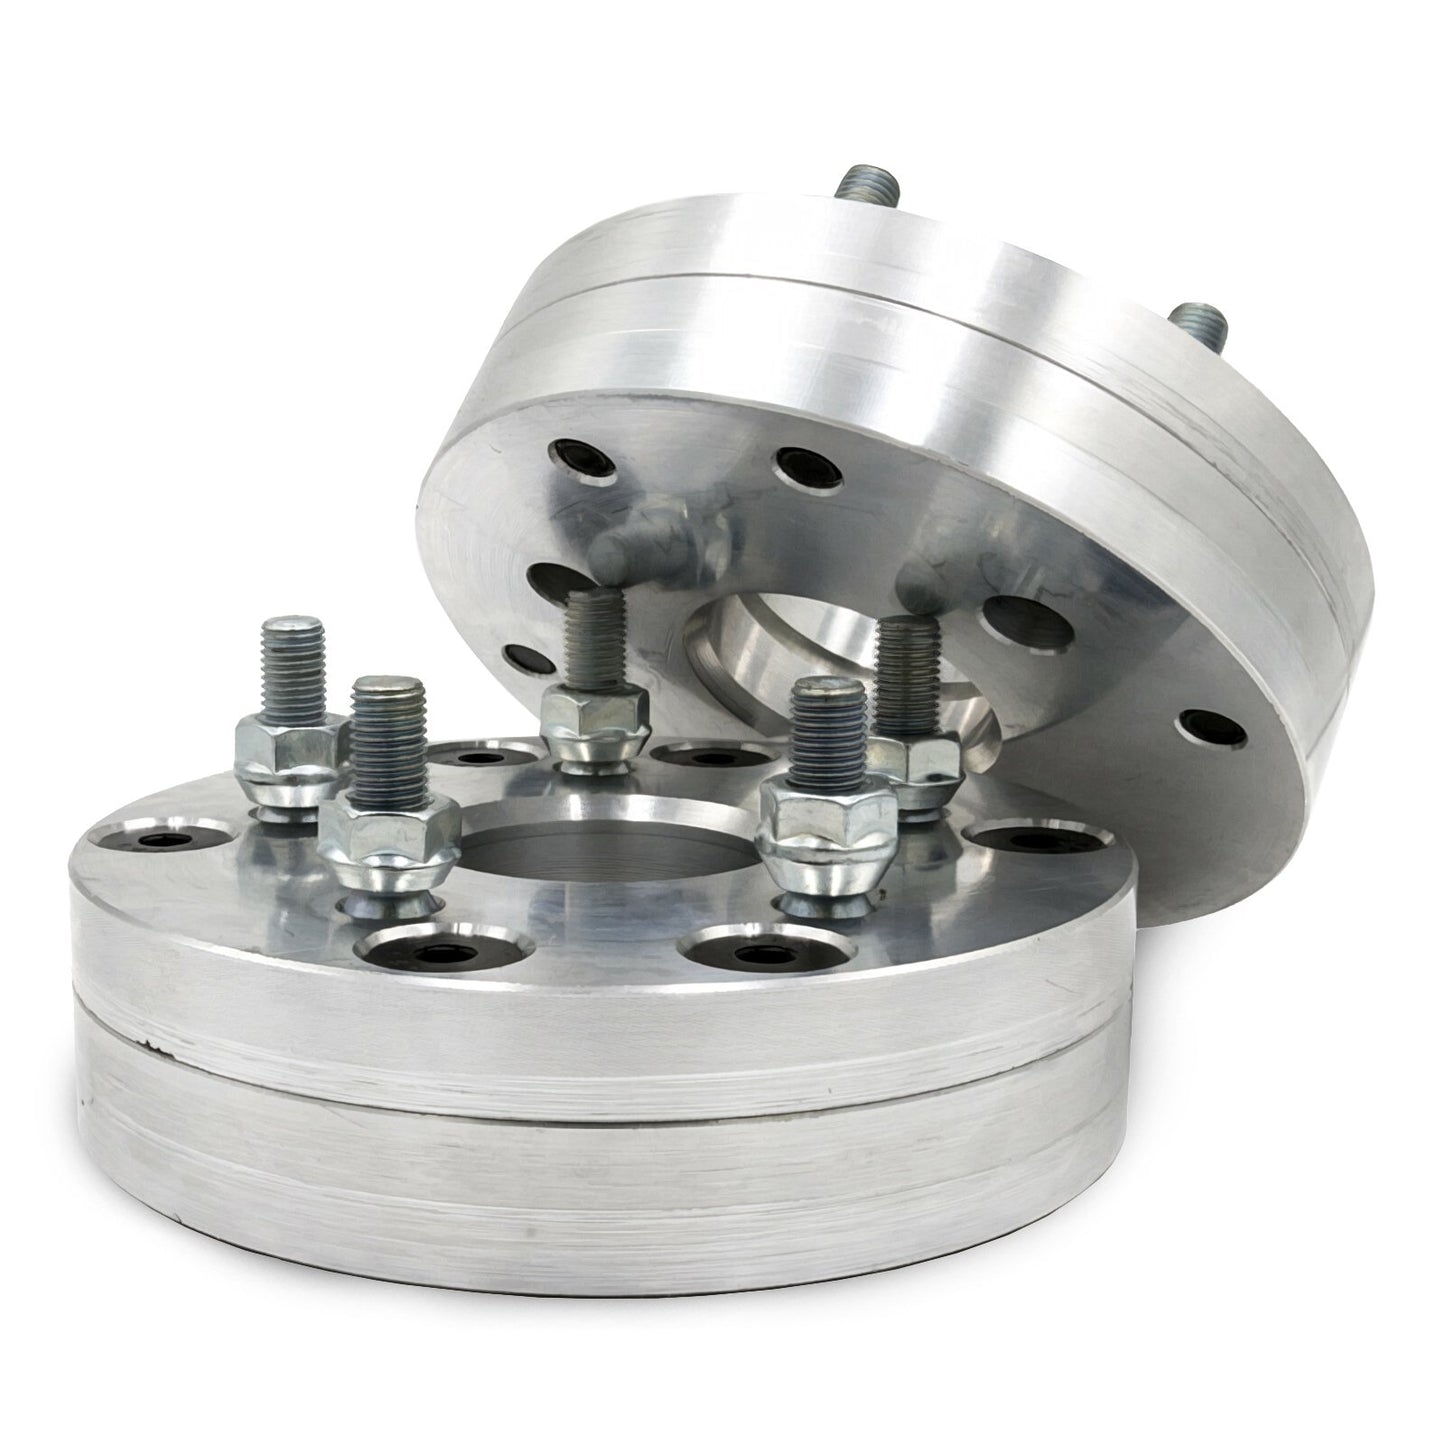 4x100 to 5x5" 2 piece Wheel Adapter - Thickness: 1.5" - 3"